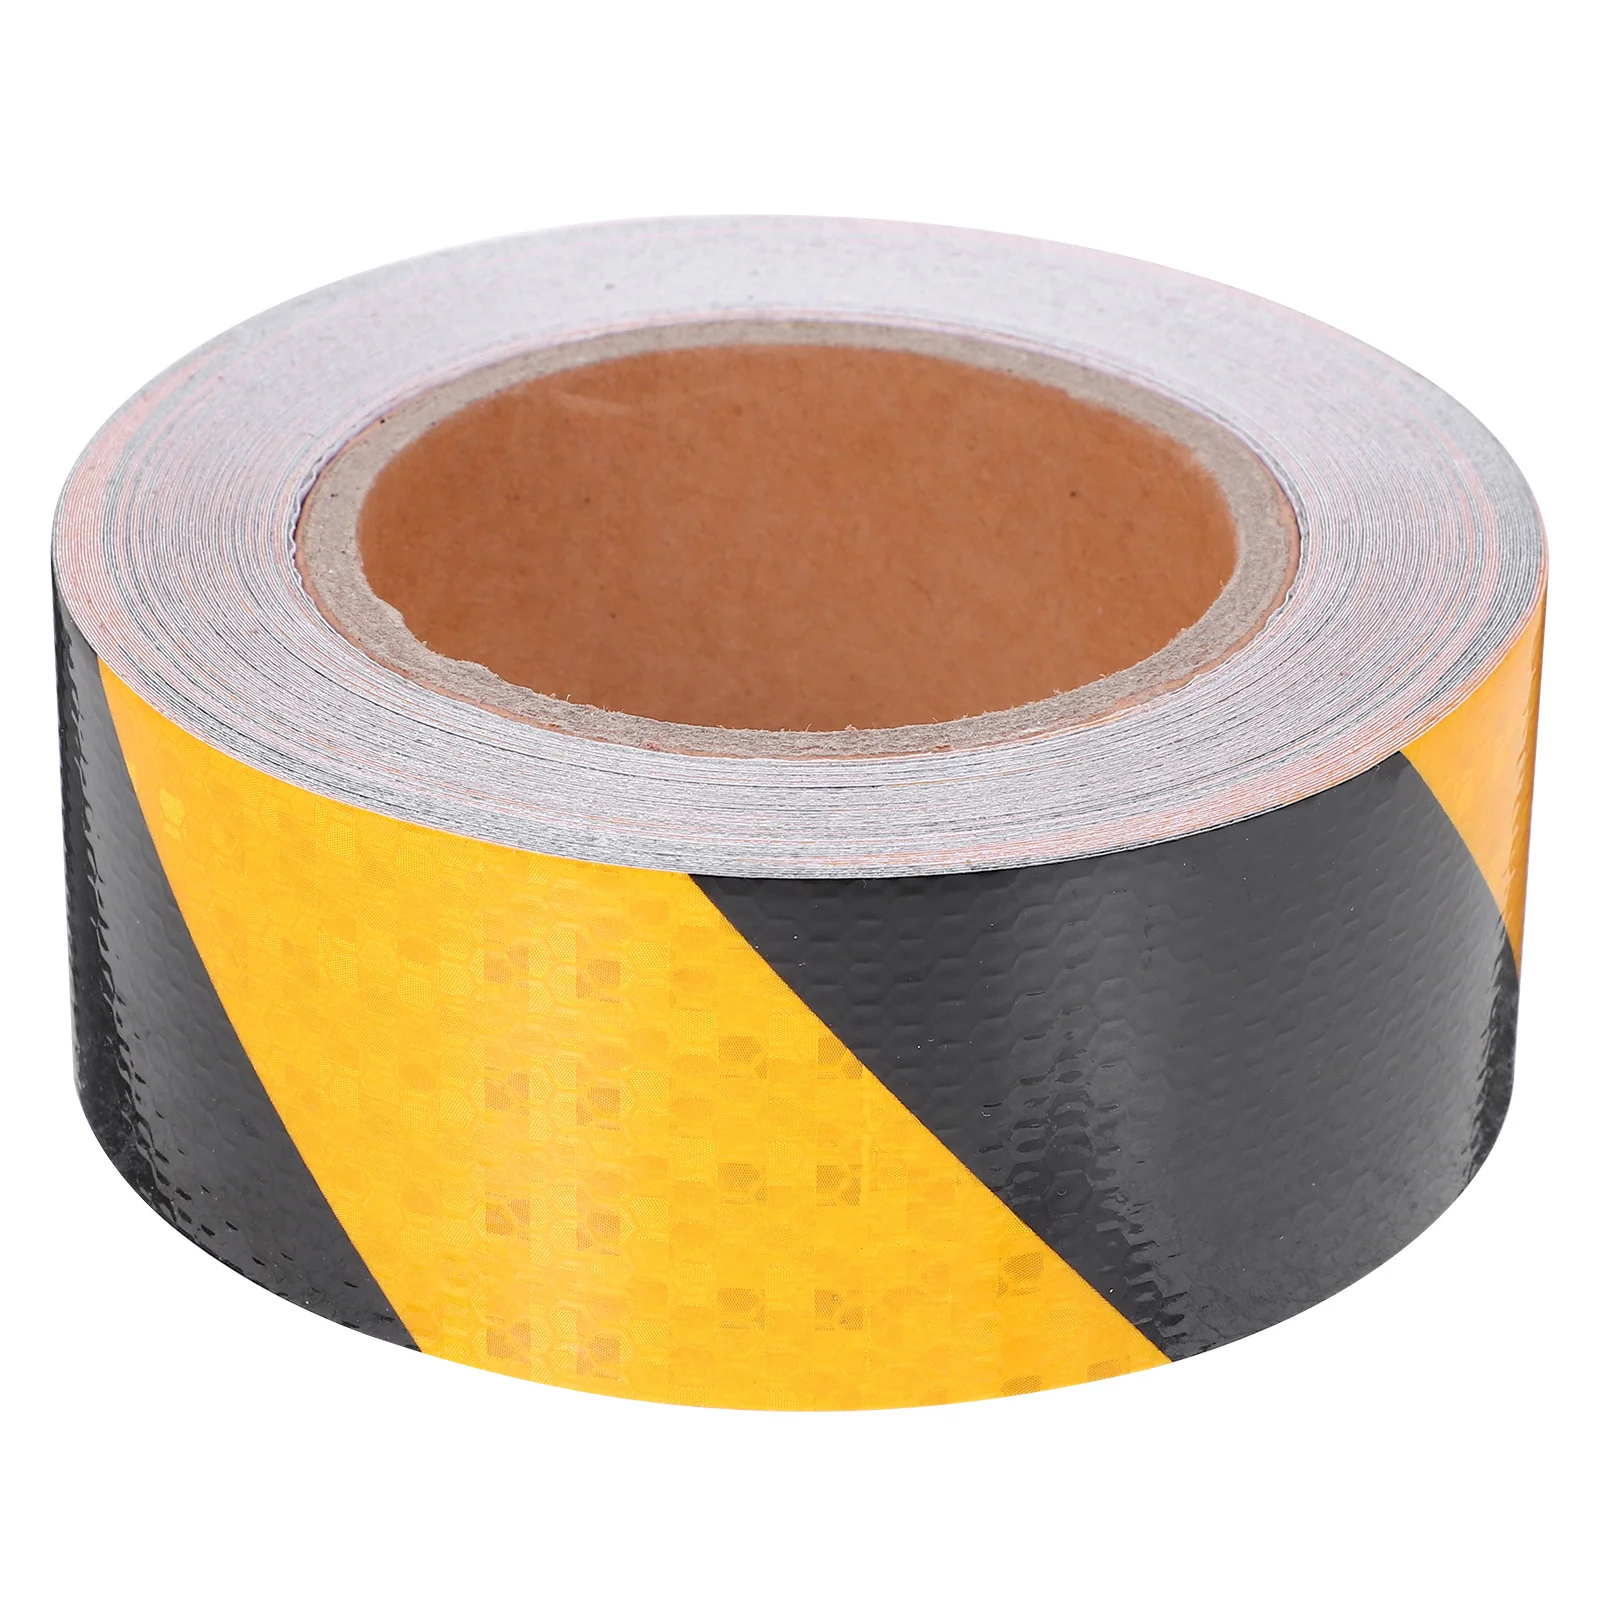 

Trailer Reflective Tape Trucks Reflector Safety Stripes Warning Stickers High Visibility Outdoor